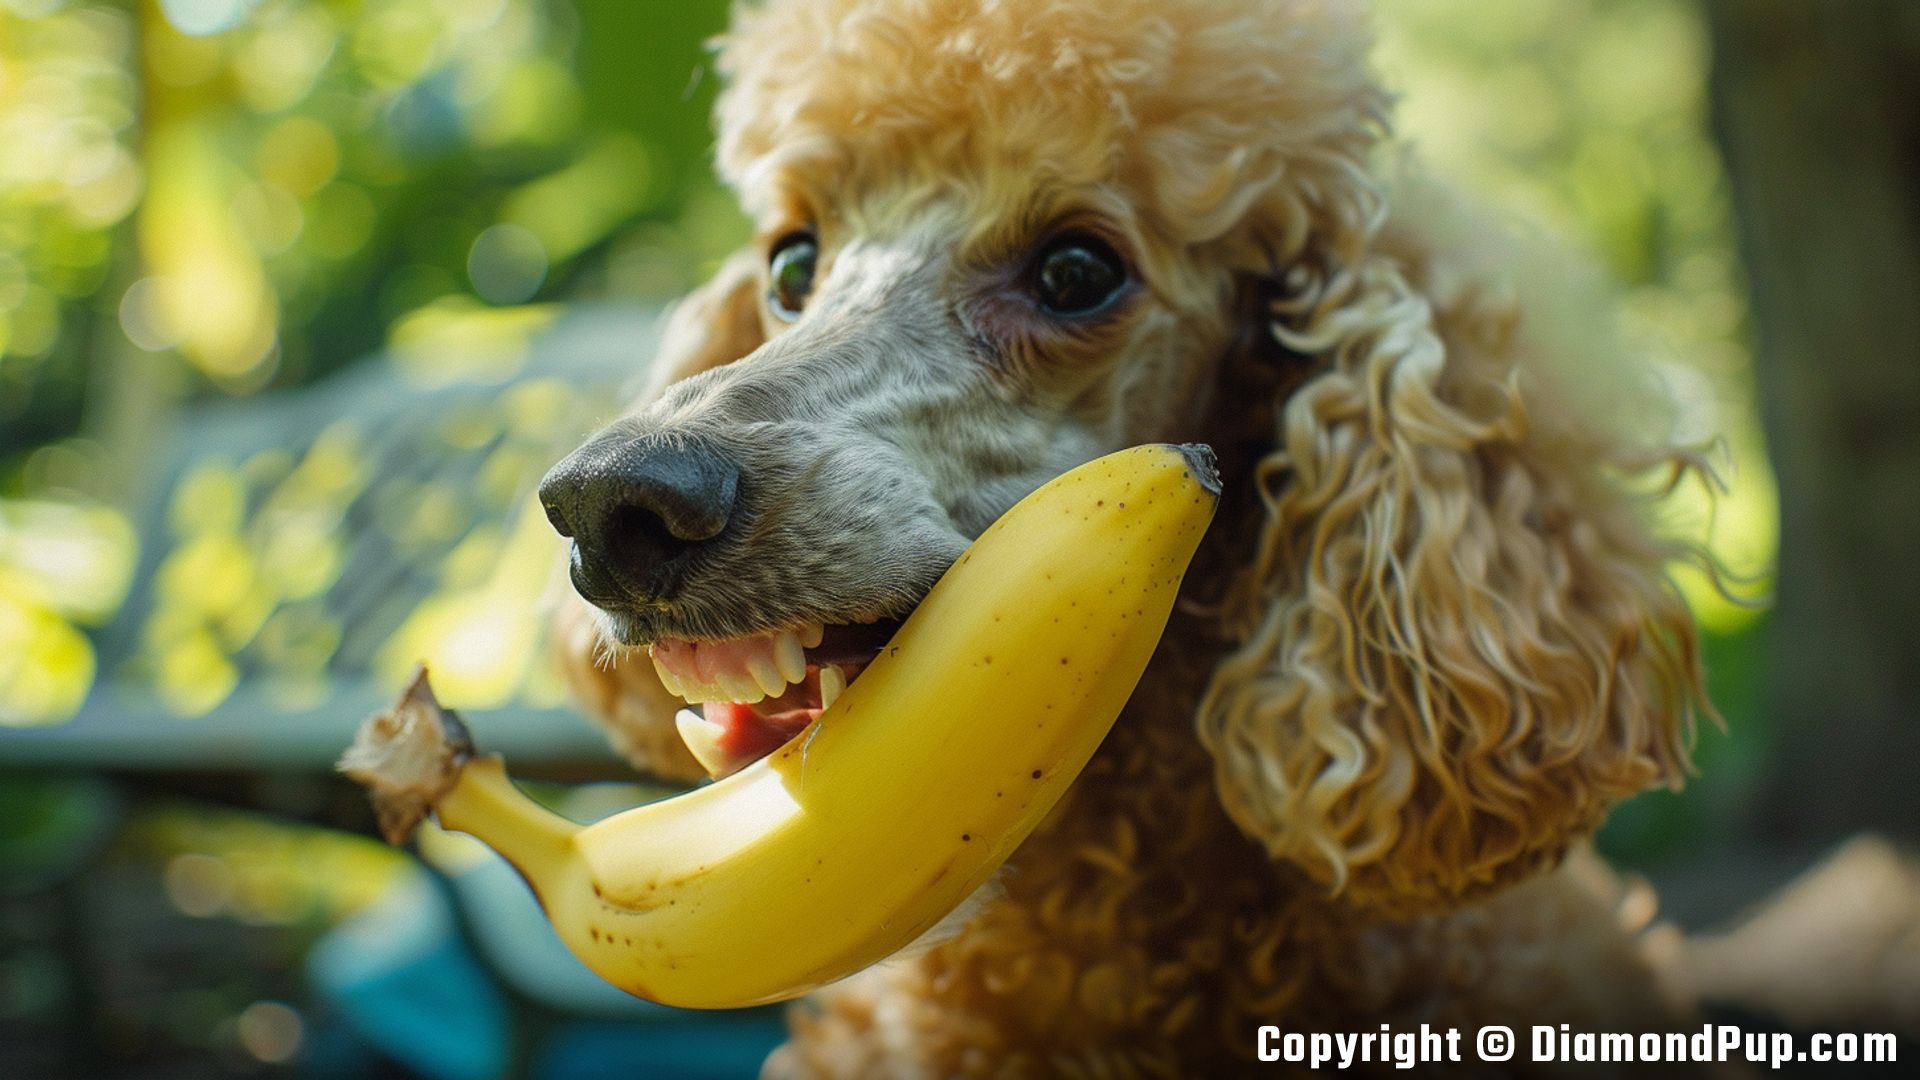 Photograph of a Cute Poodle Snacking on Banana